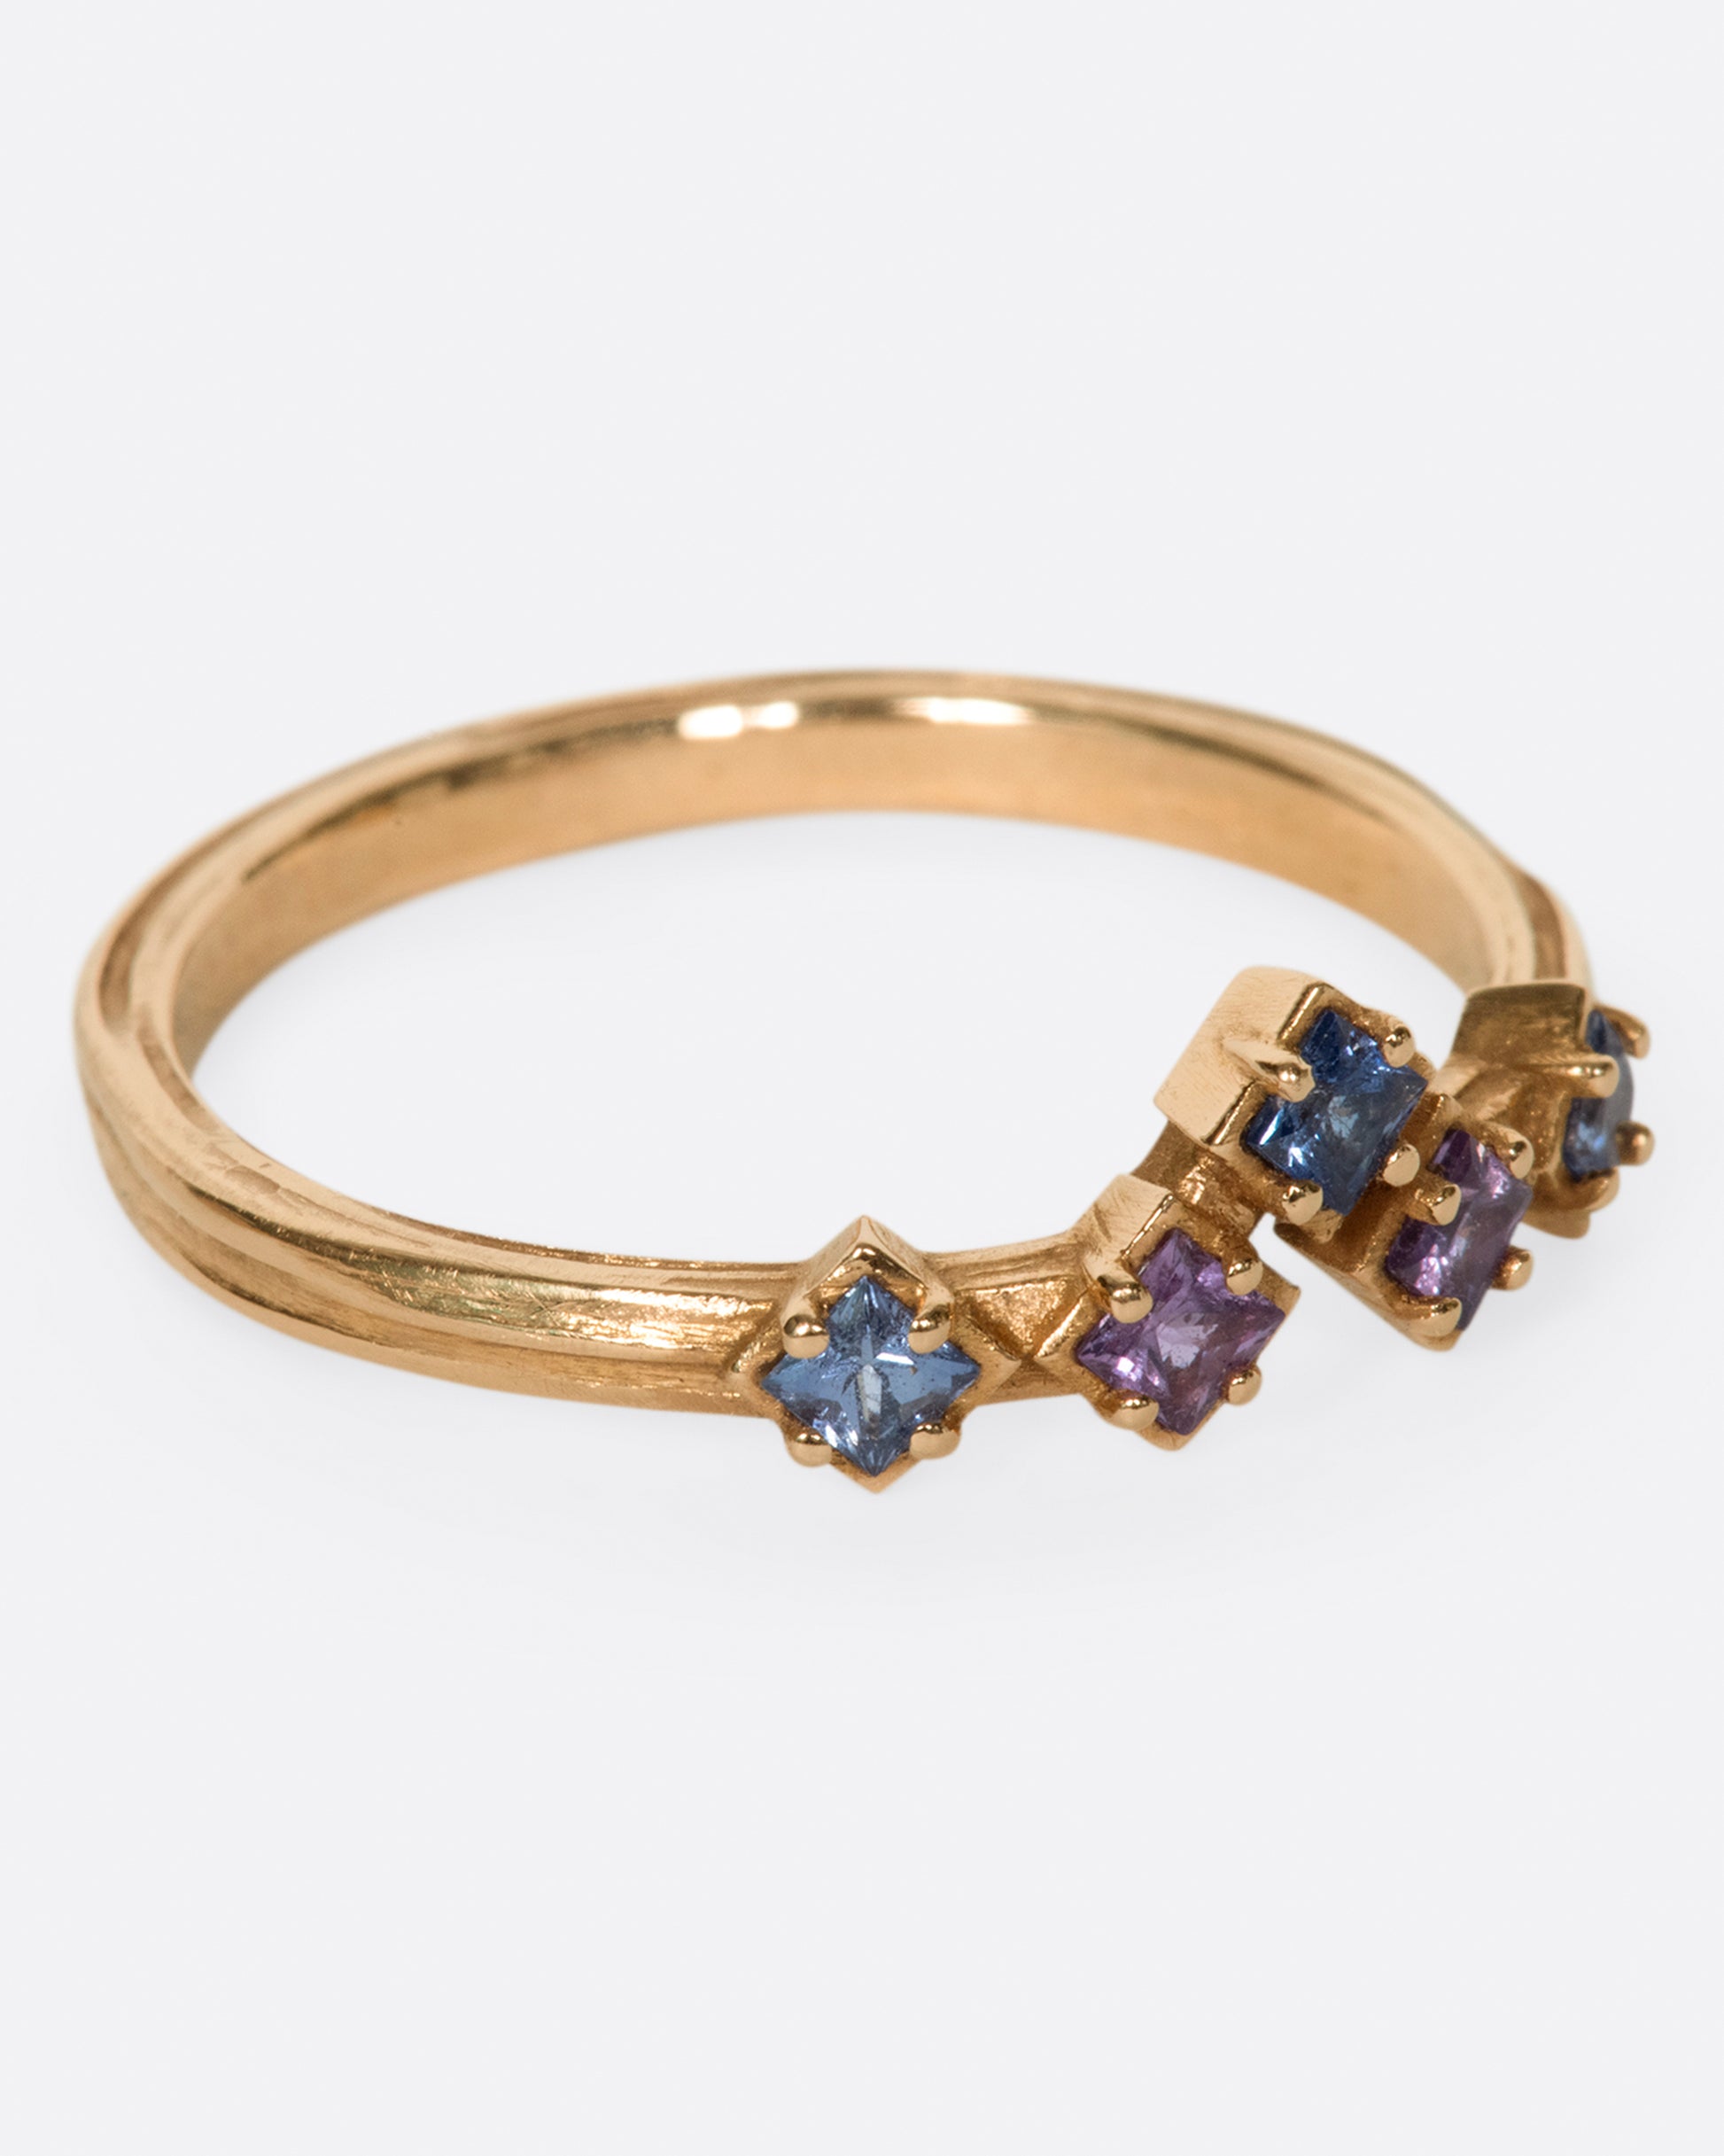 Inspired by the architecture of Tokyo, this curved band features princess cut blue and purple sapphires.